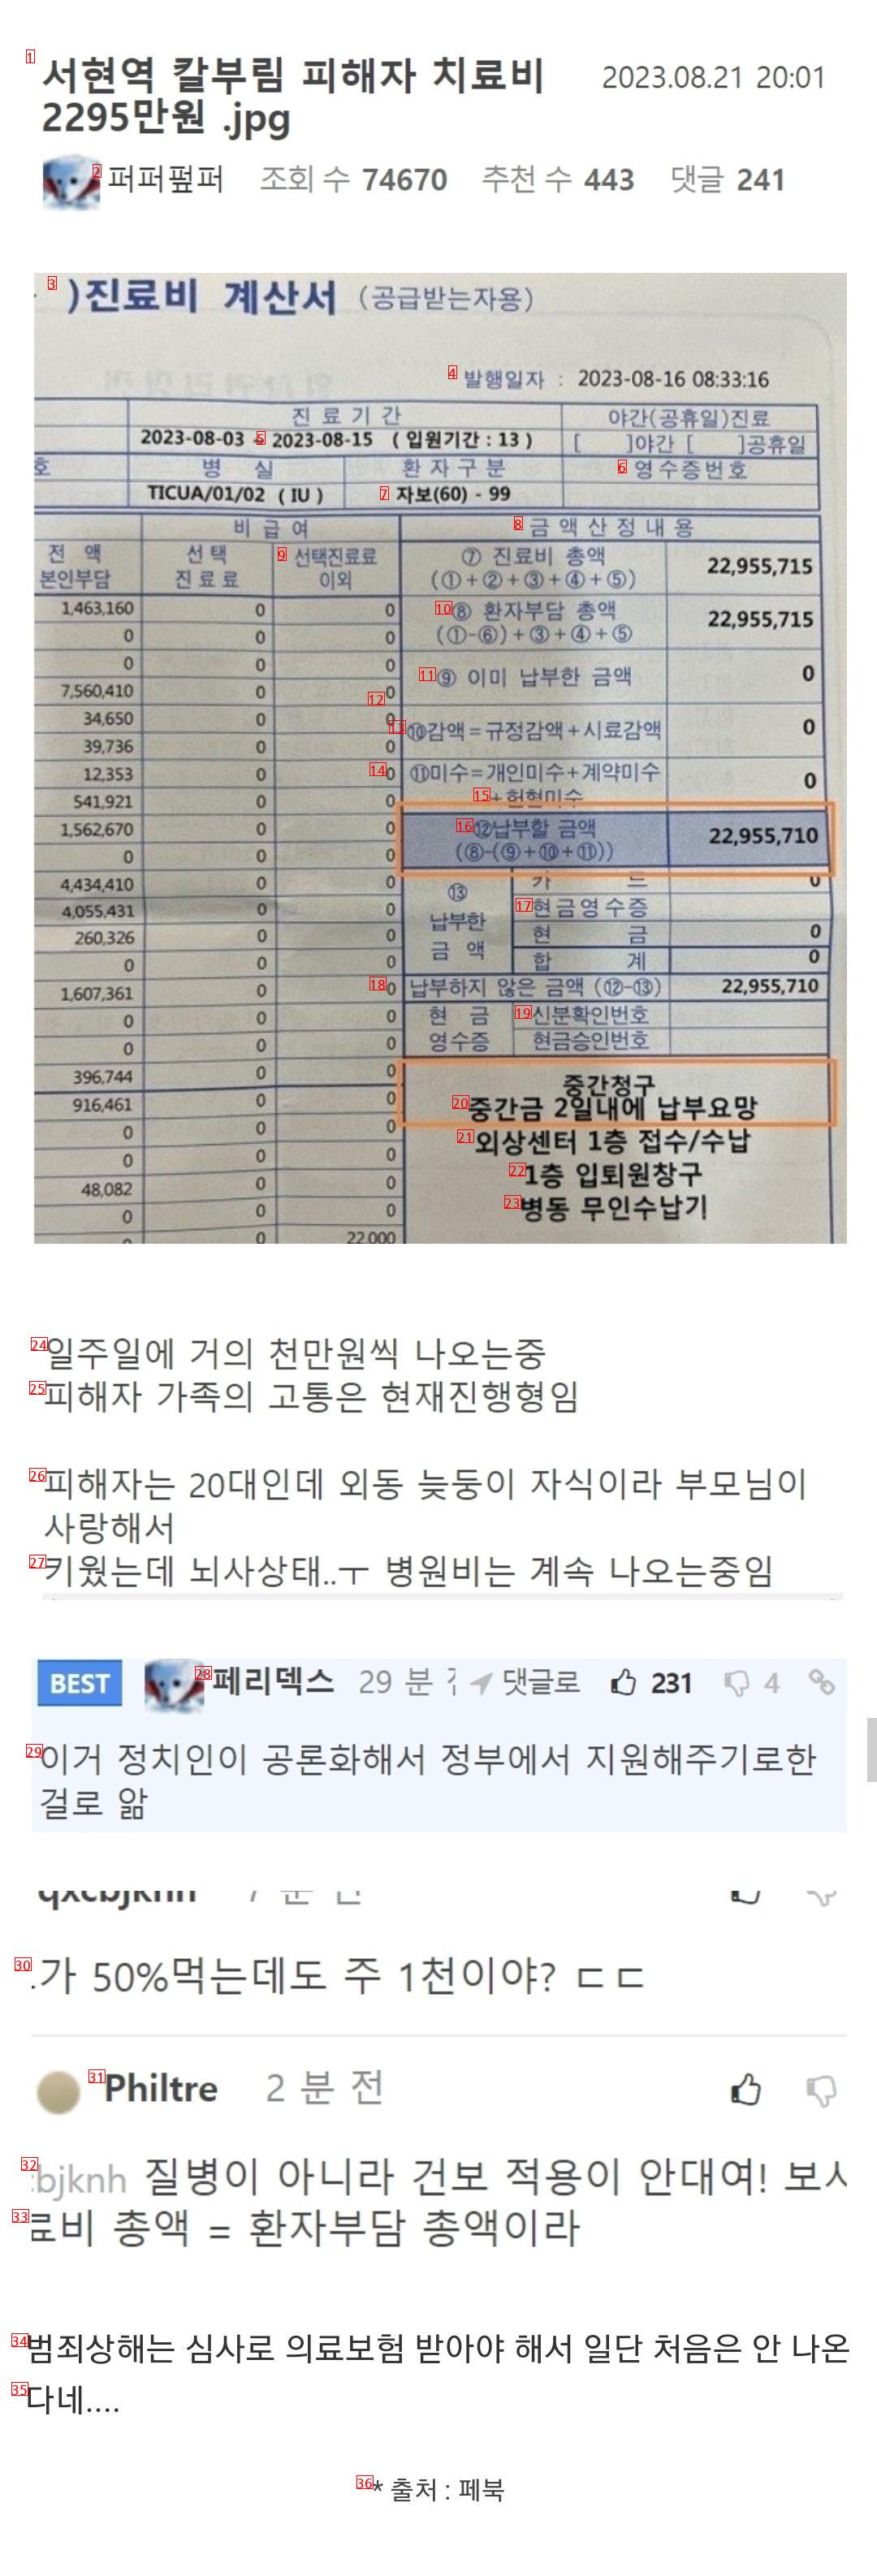 KRW 22.95 million for the treatment of victims of the stabbing at Seohyeon Station